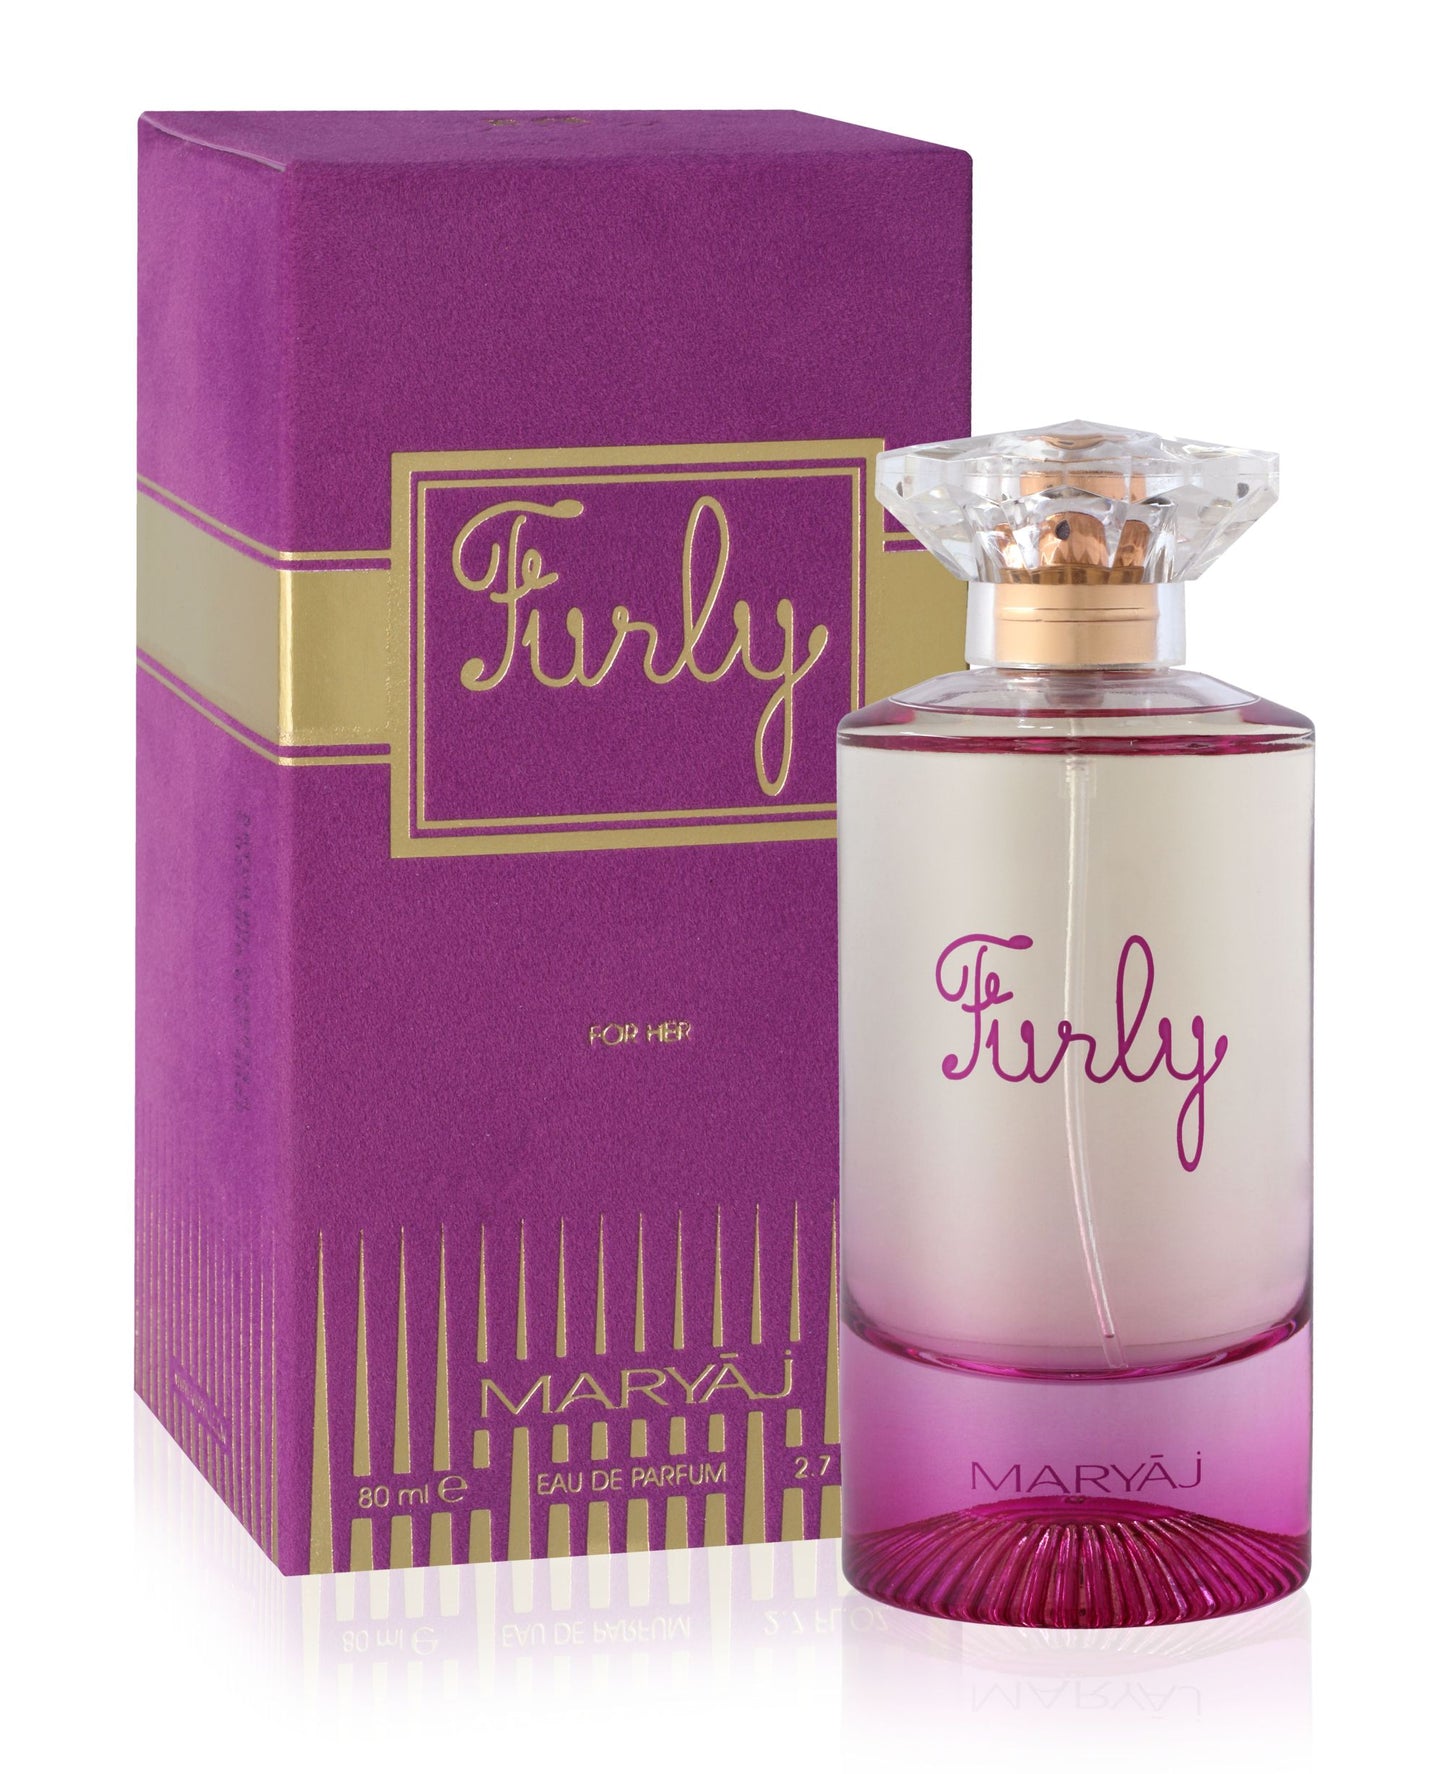 Calin & Furly: A Valentine's Day Perfume Gift Set for Her